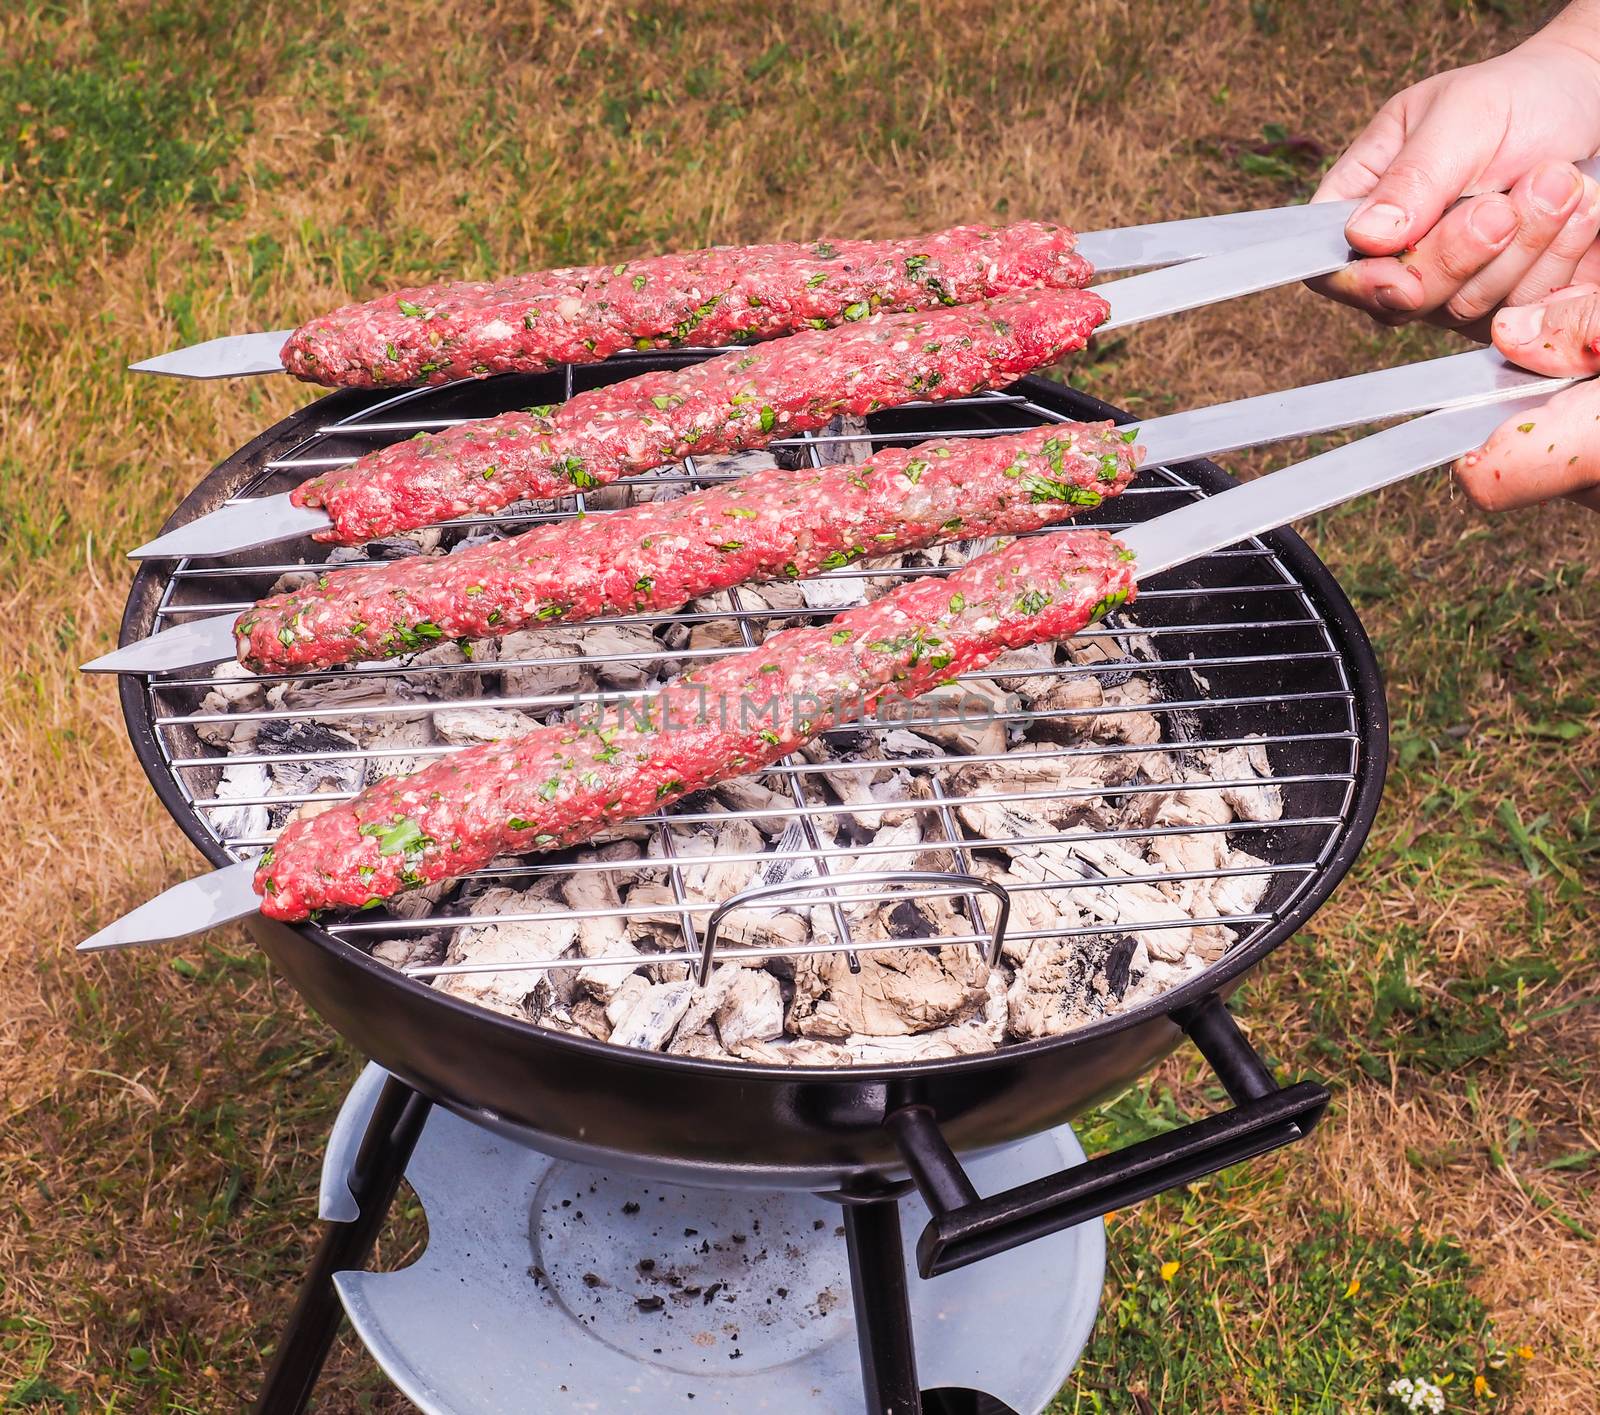 A chef putting red meat shish kebab onto a charcoal barbecue by Arvebettum